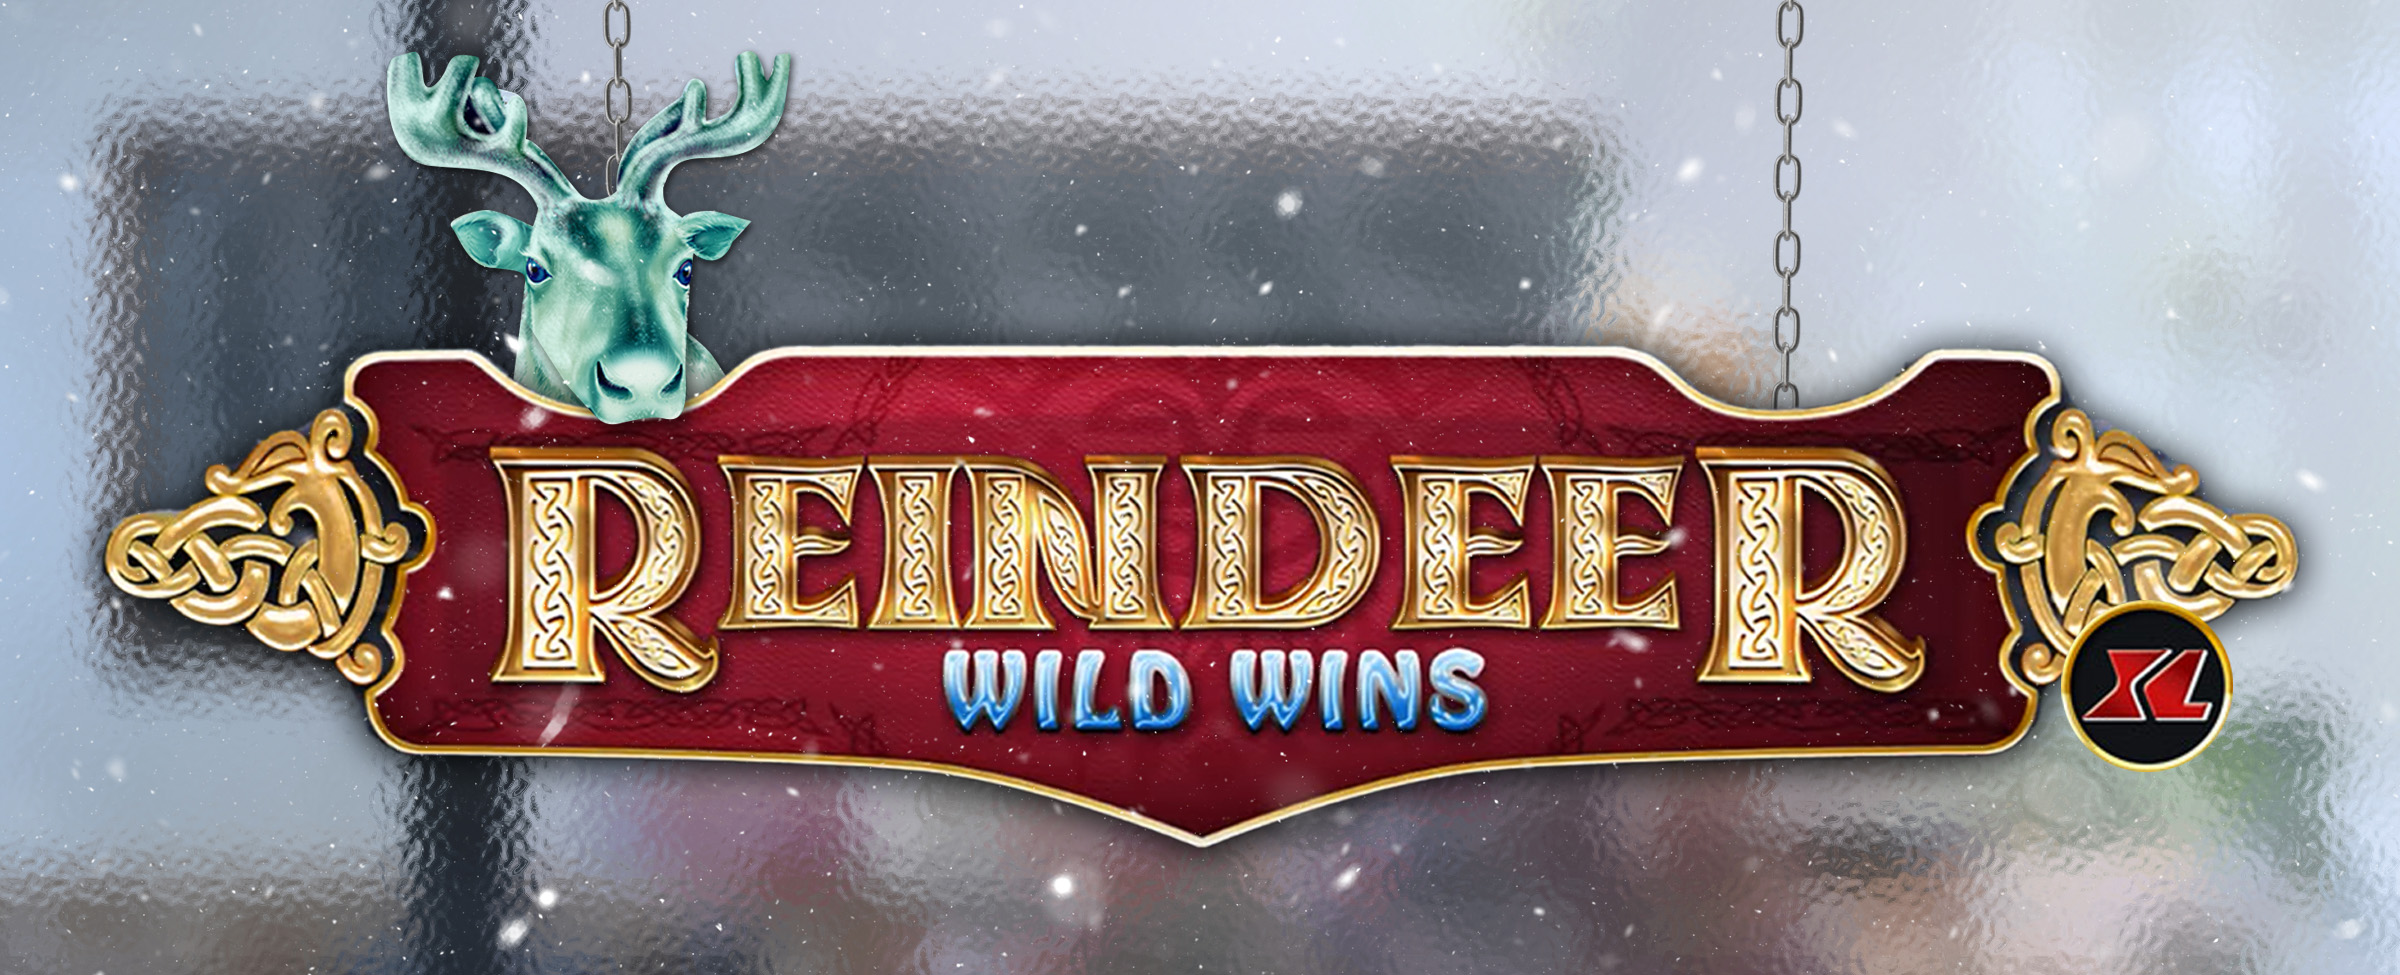 A sign hangs down a glazed shop front window by a thin chain, with an old-world-accented gold frame and an ‘XL’ pendant in one corner, and an illustrated aqua reindeer on the opposing corner. Inside the frame it reads “Reindeer Wild Wins”, from the Cafe Casino slot game of the same name.